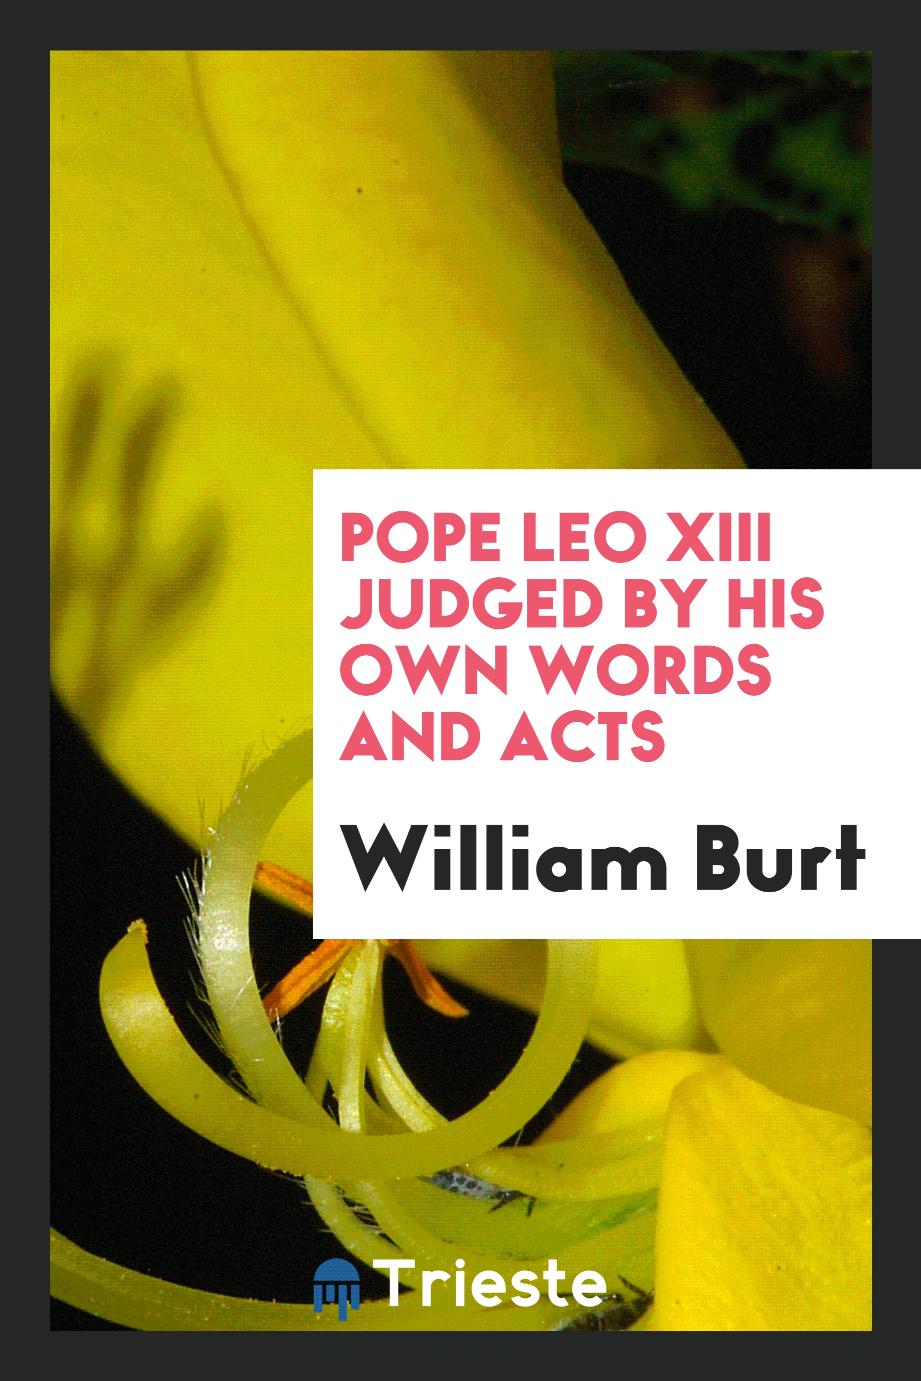 Pope Leo XIII judged by his own words and acts